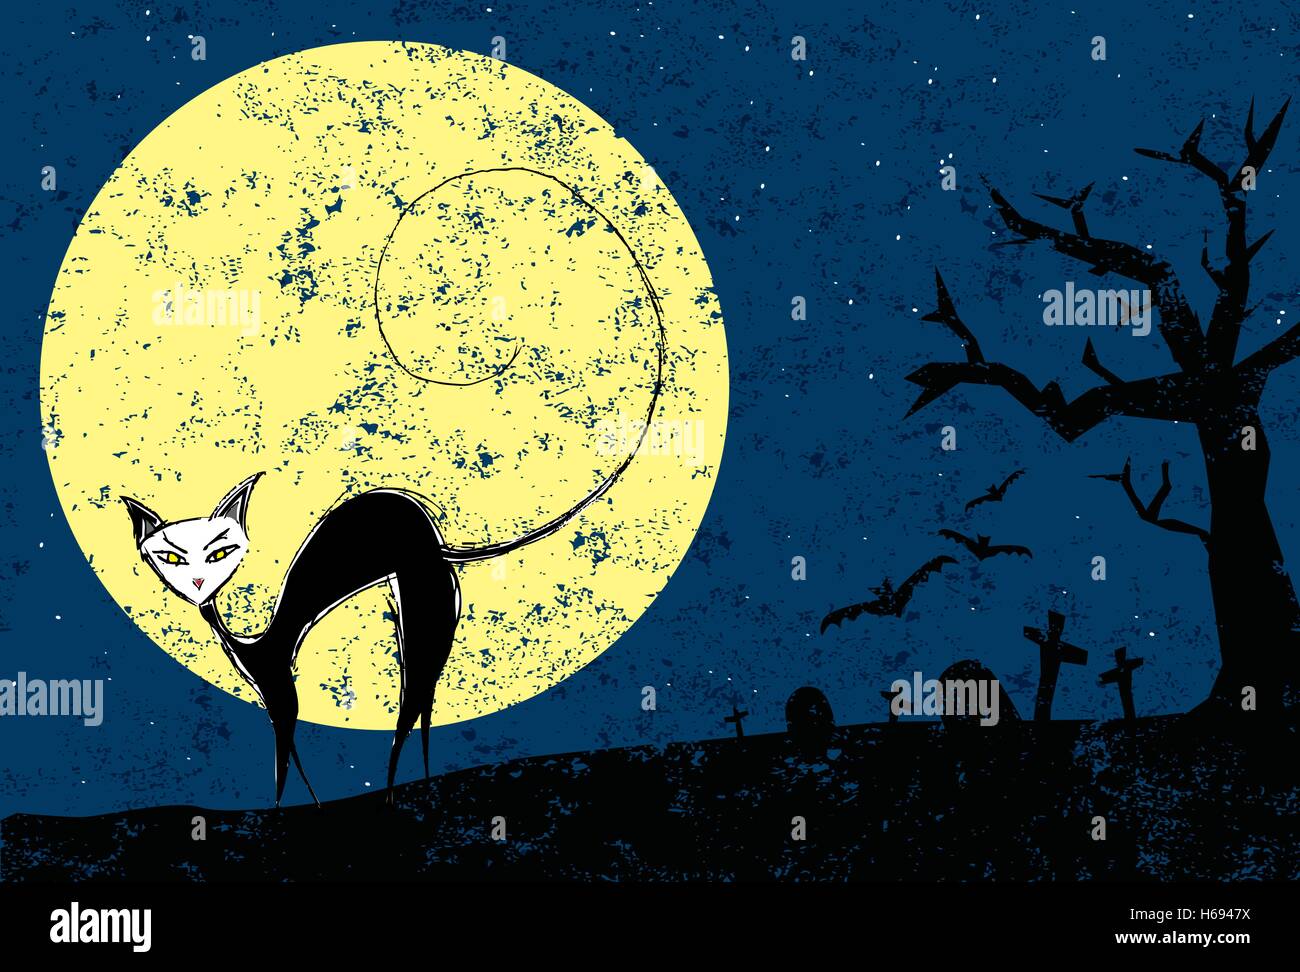 Halloween Black Cat   A black cat in a cemetery with a full moon on Halloween. Stock Vector